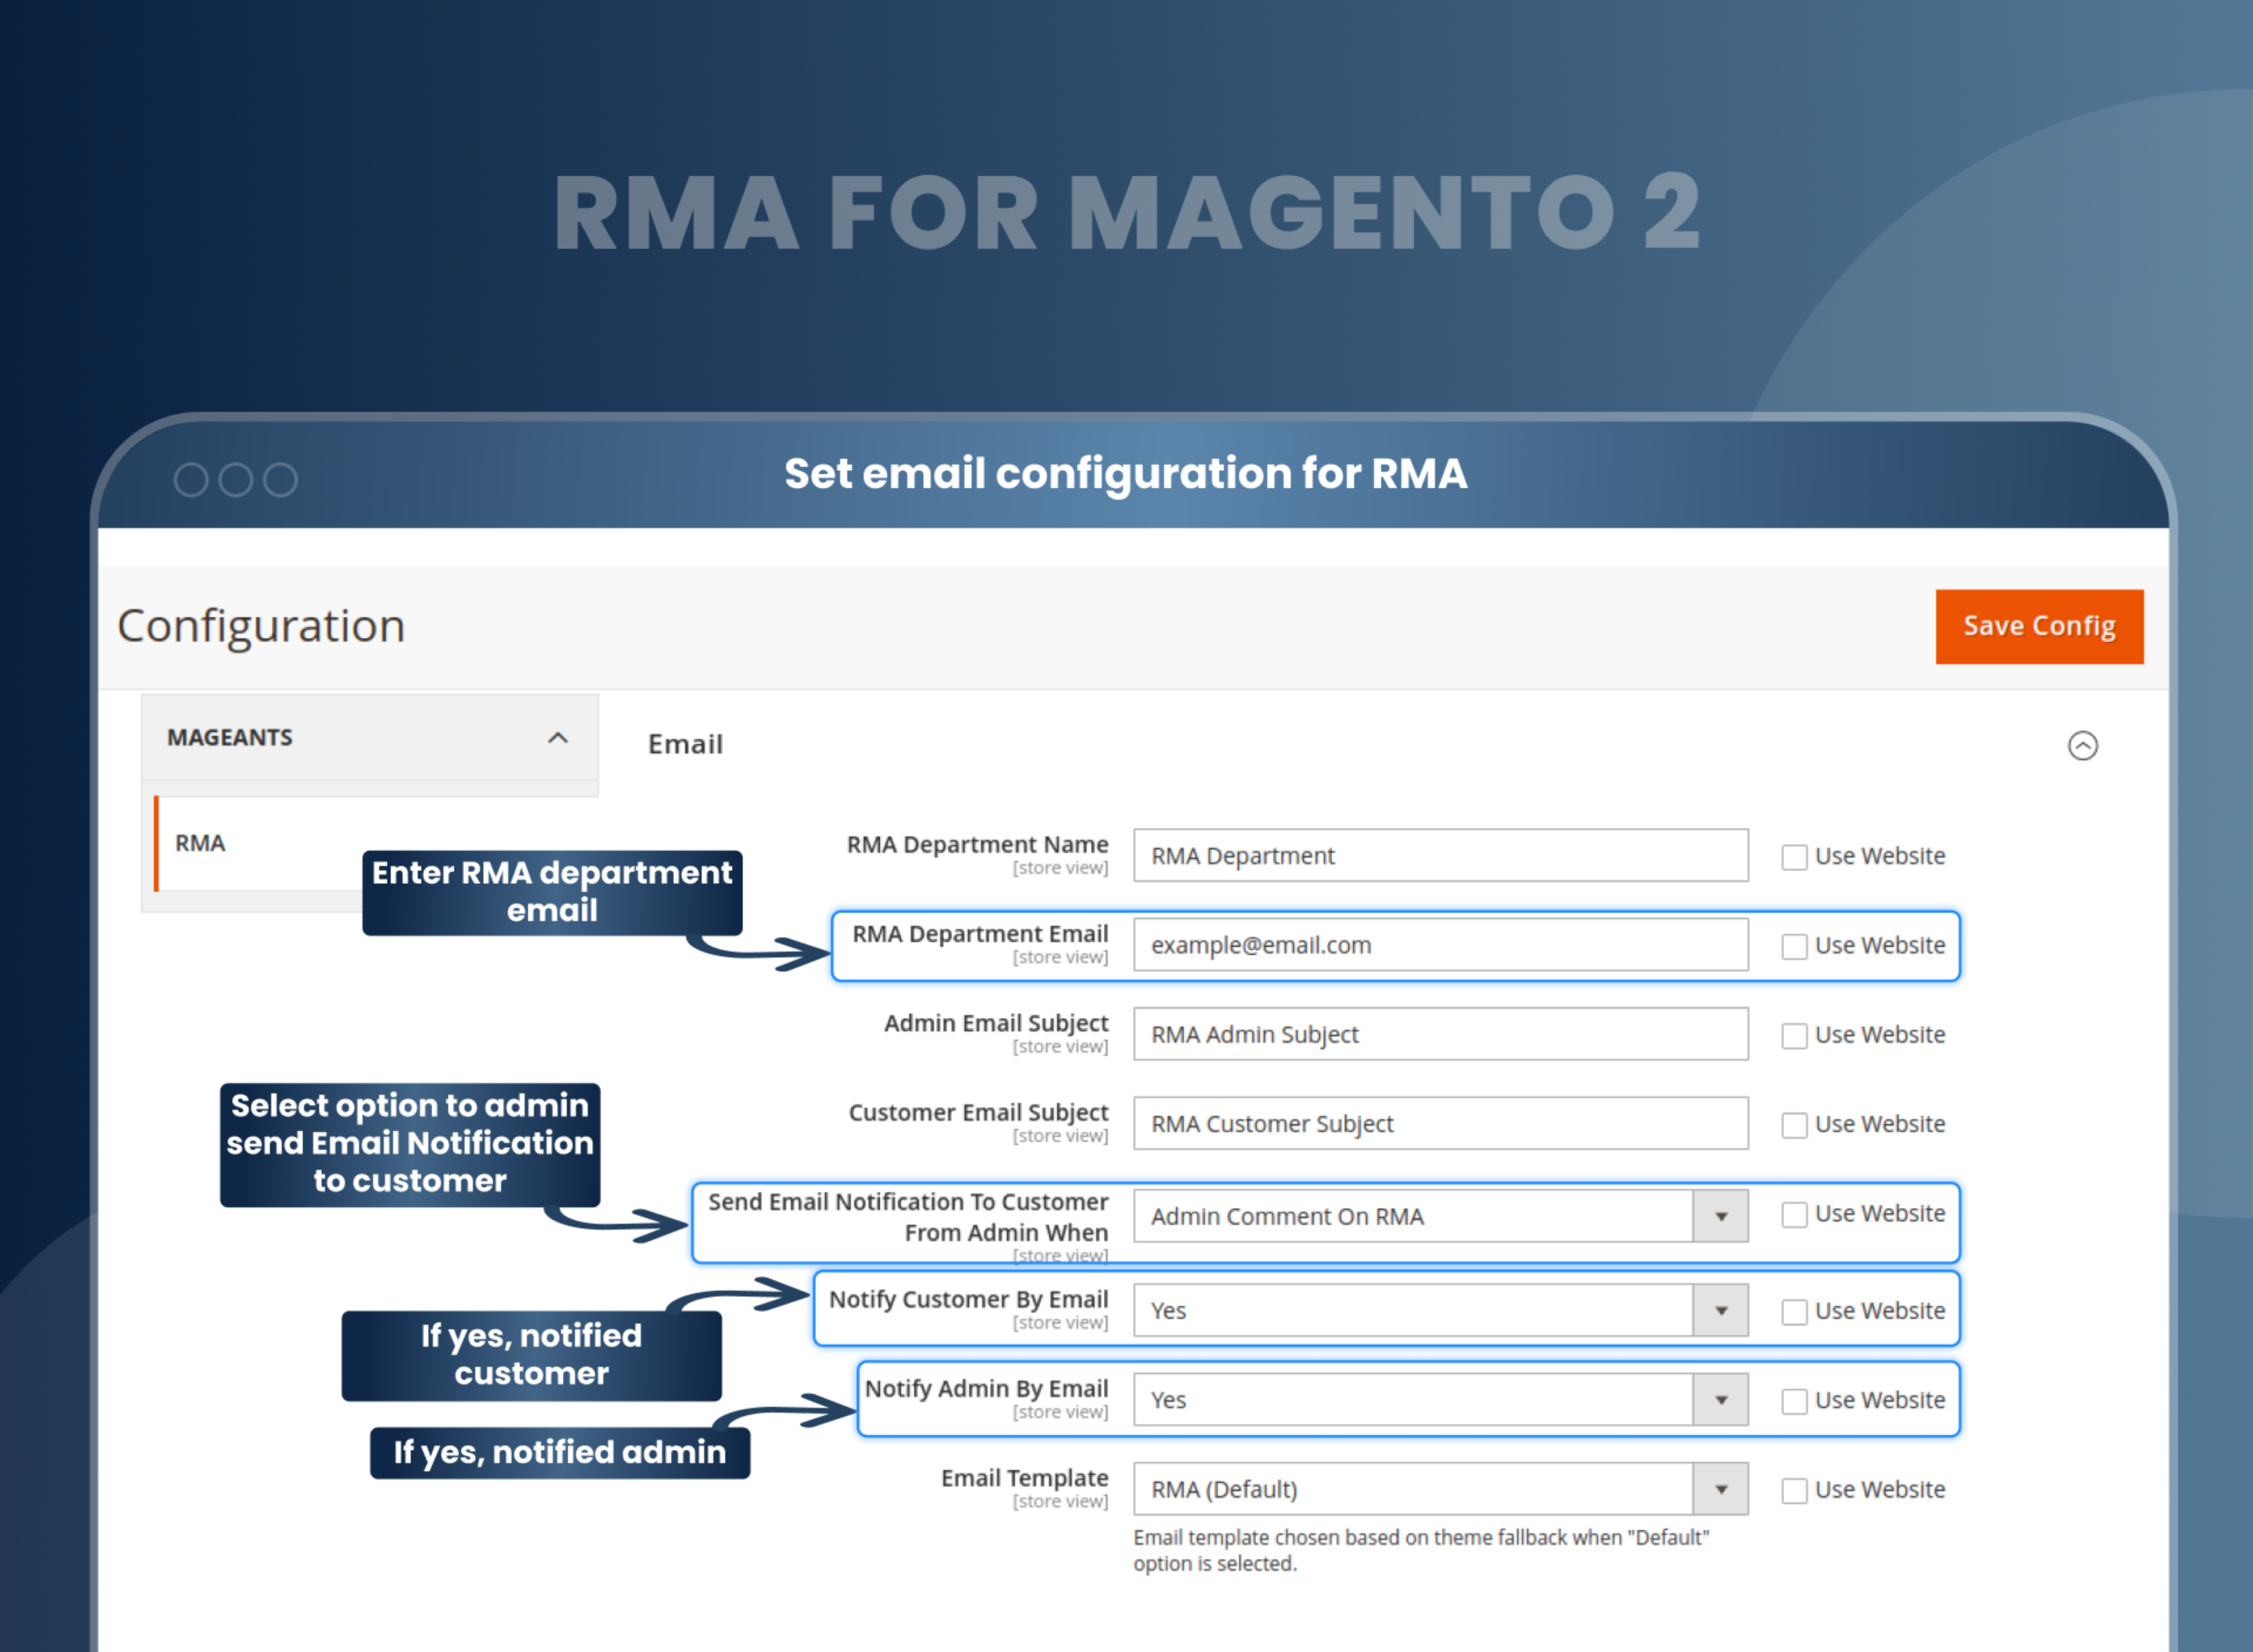 Set email configuration for RMA